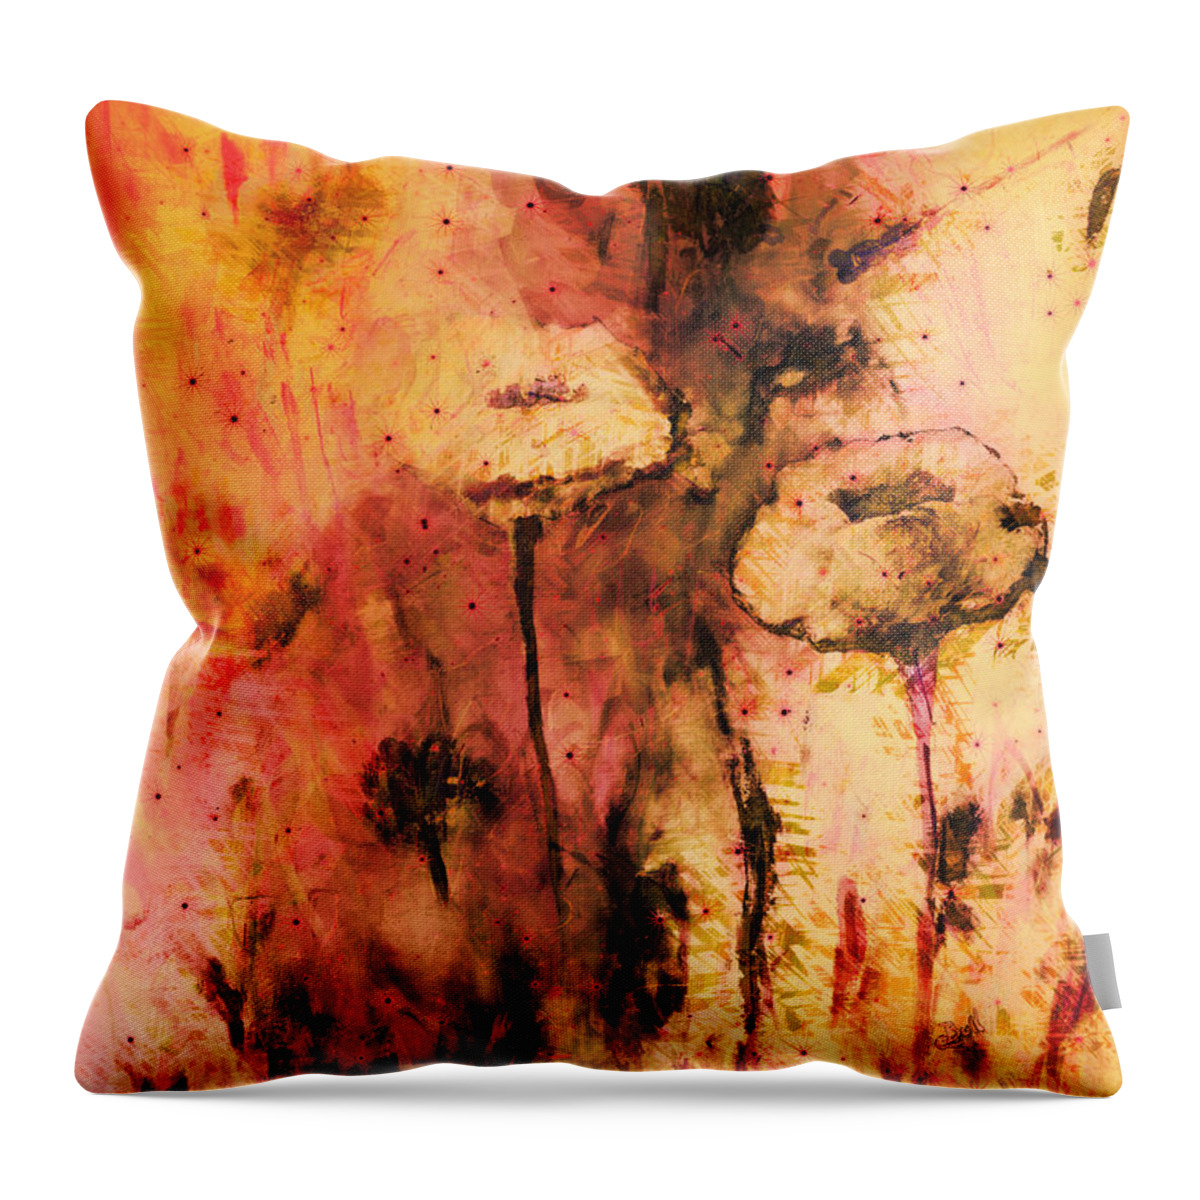 Flowers Throw Pillow featuring the painting Golden Flowers by Claire Bull